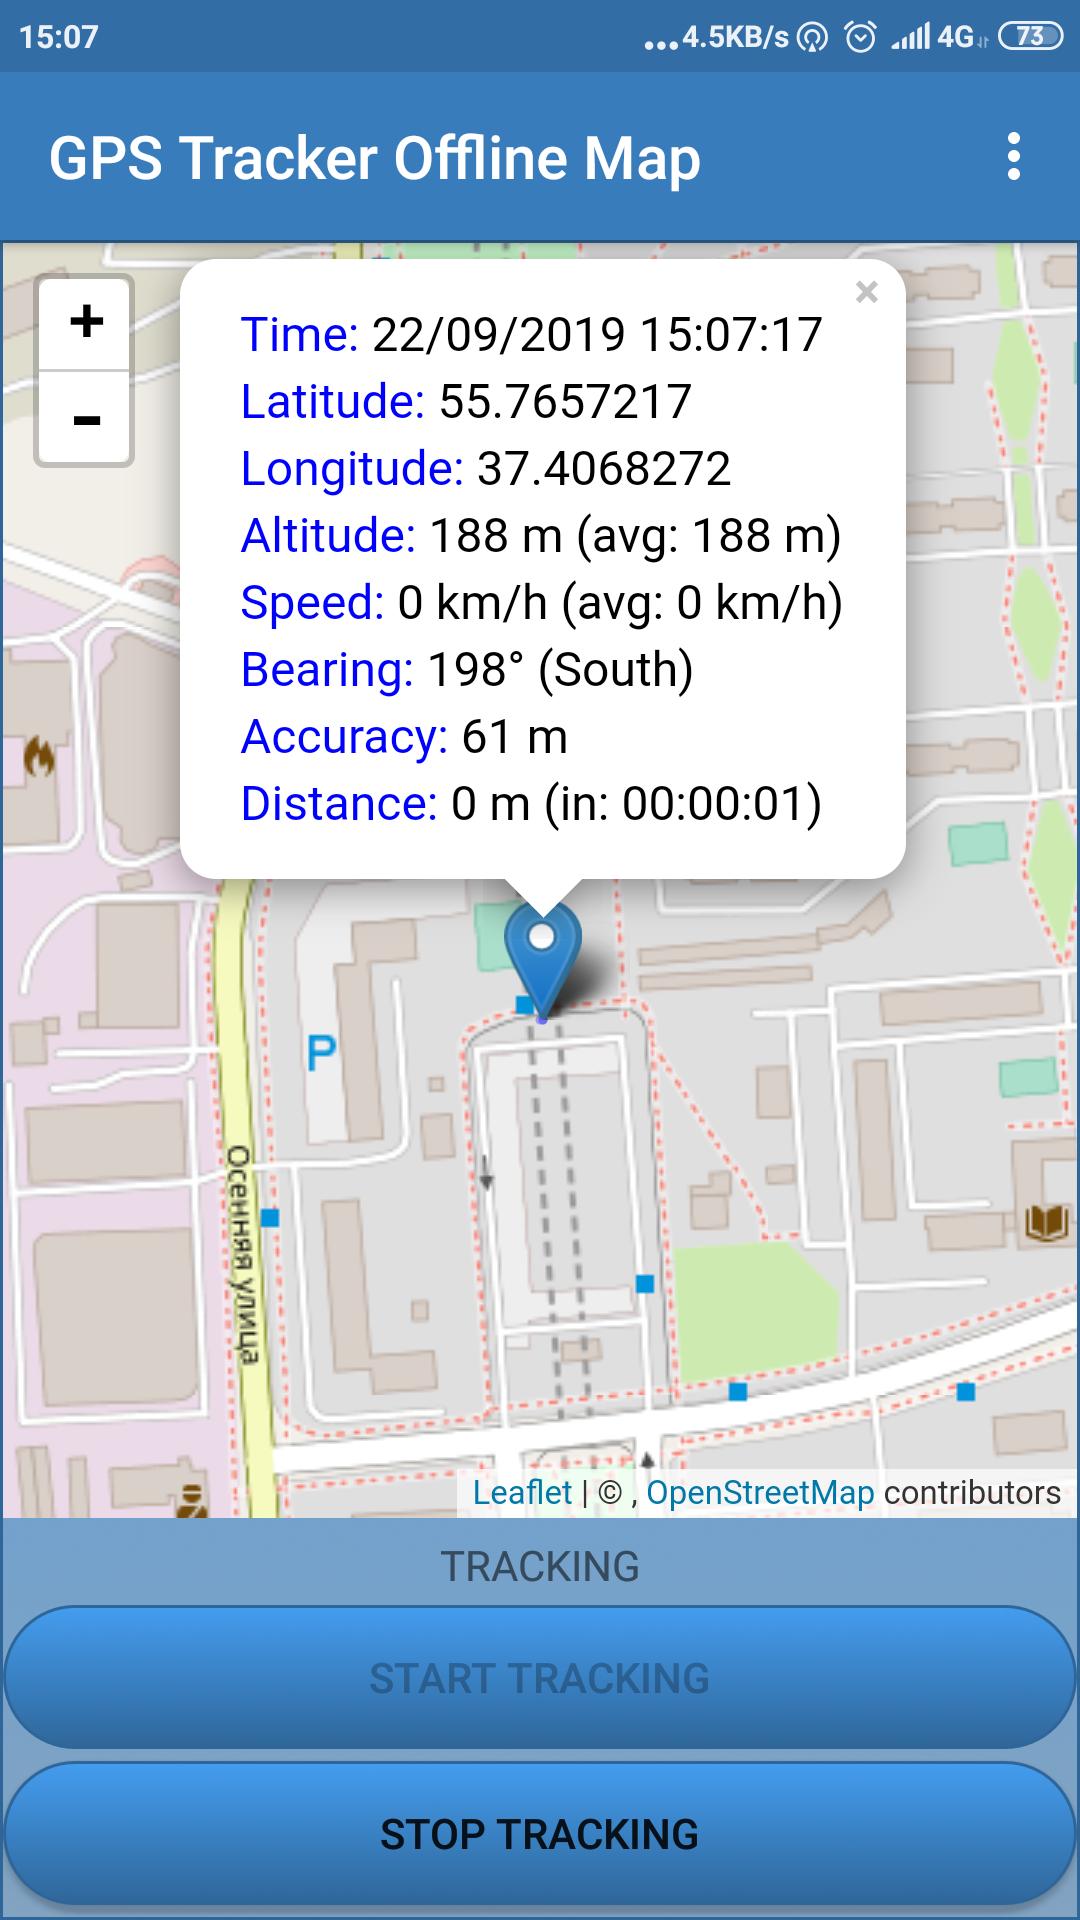 GPS Tracker Offline Map for Android - APK Download